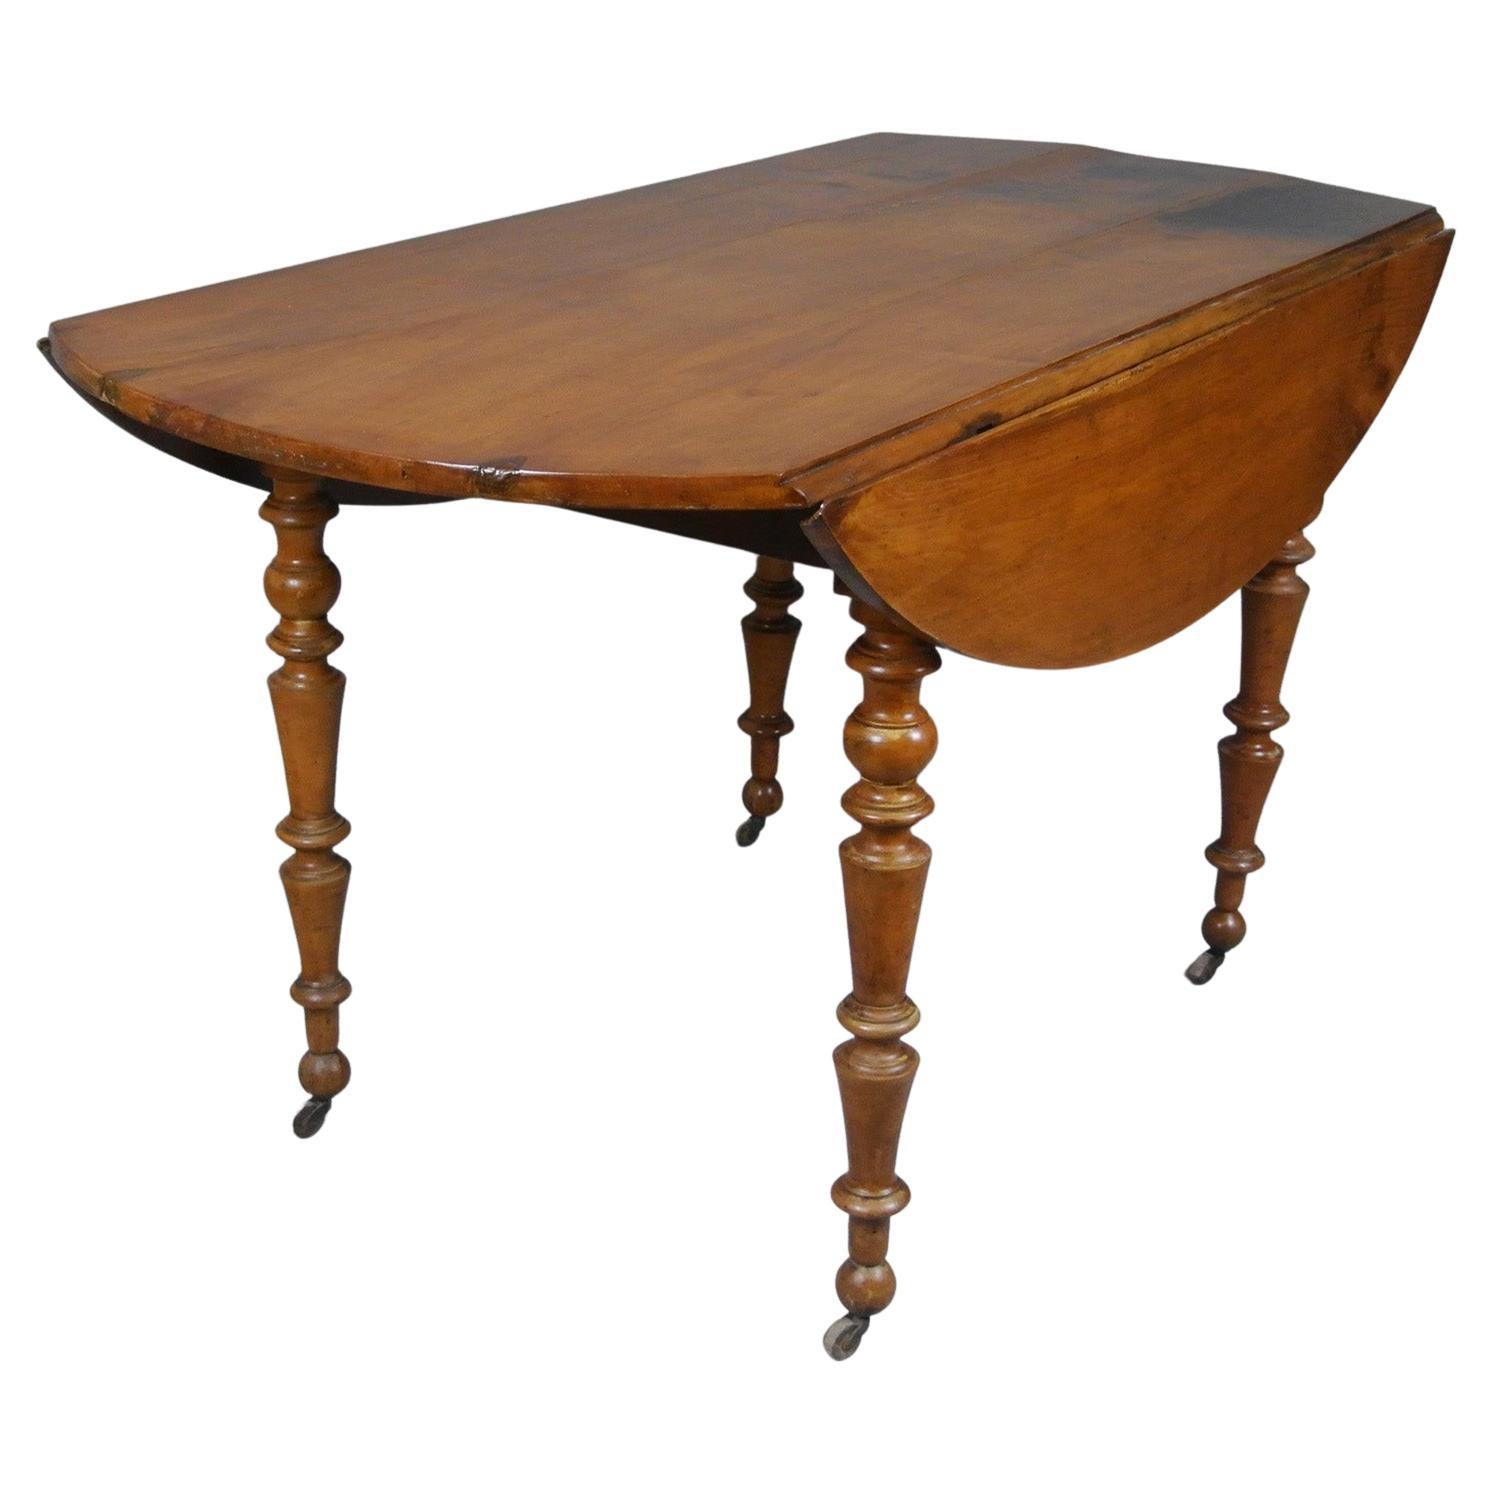 Pretty and Practical French Fruitwood Oval Drop Leaf Table c. 1880